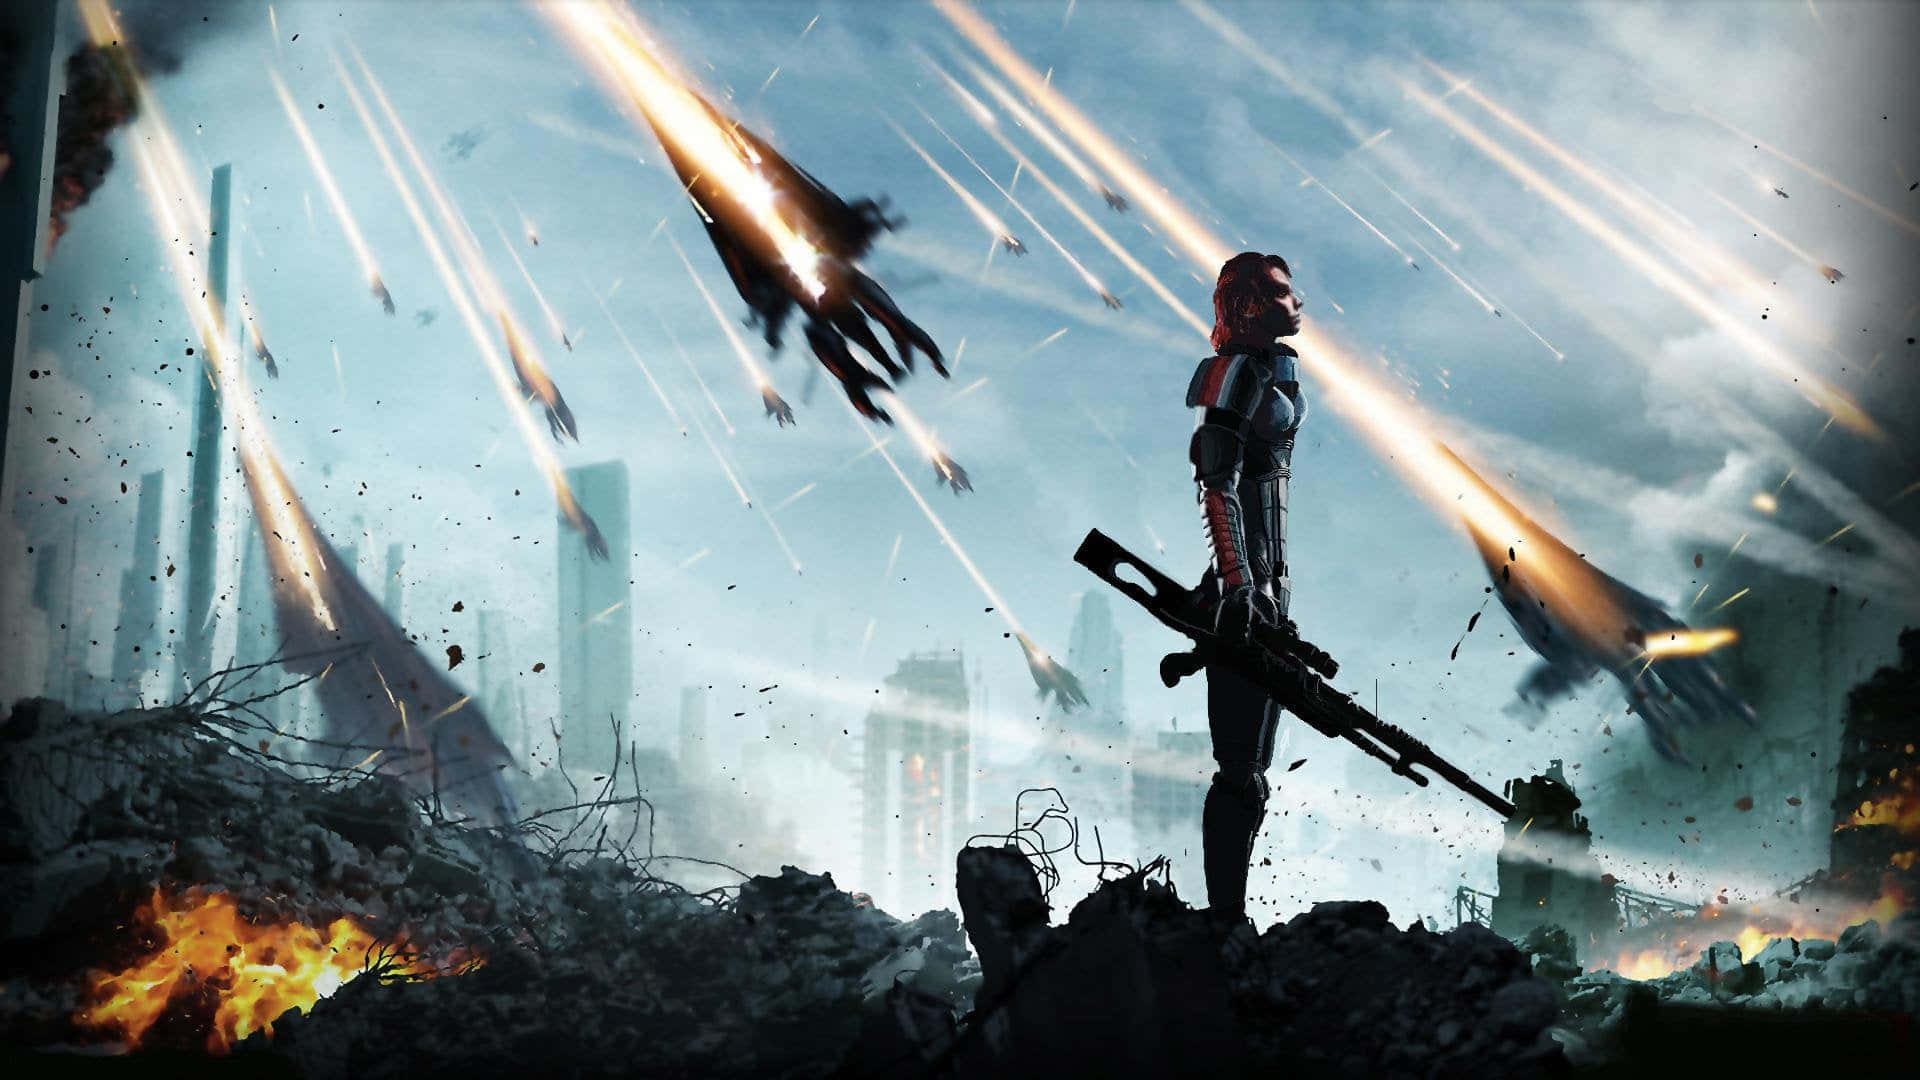 Commander Shepard, the female protagonist of the Mass Effect series, standing strong in full armor Wallpaper